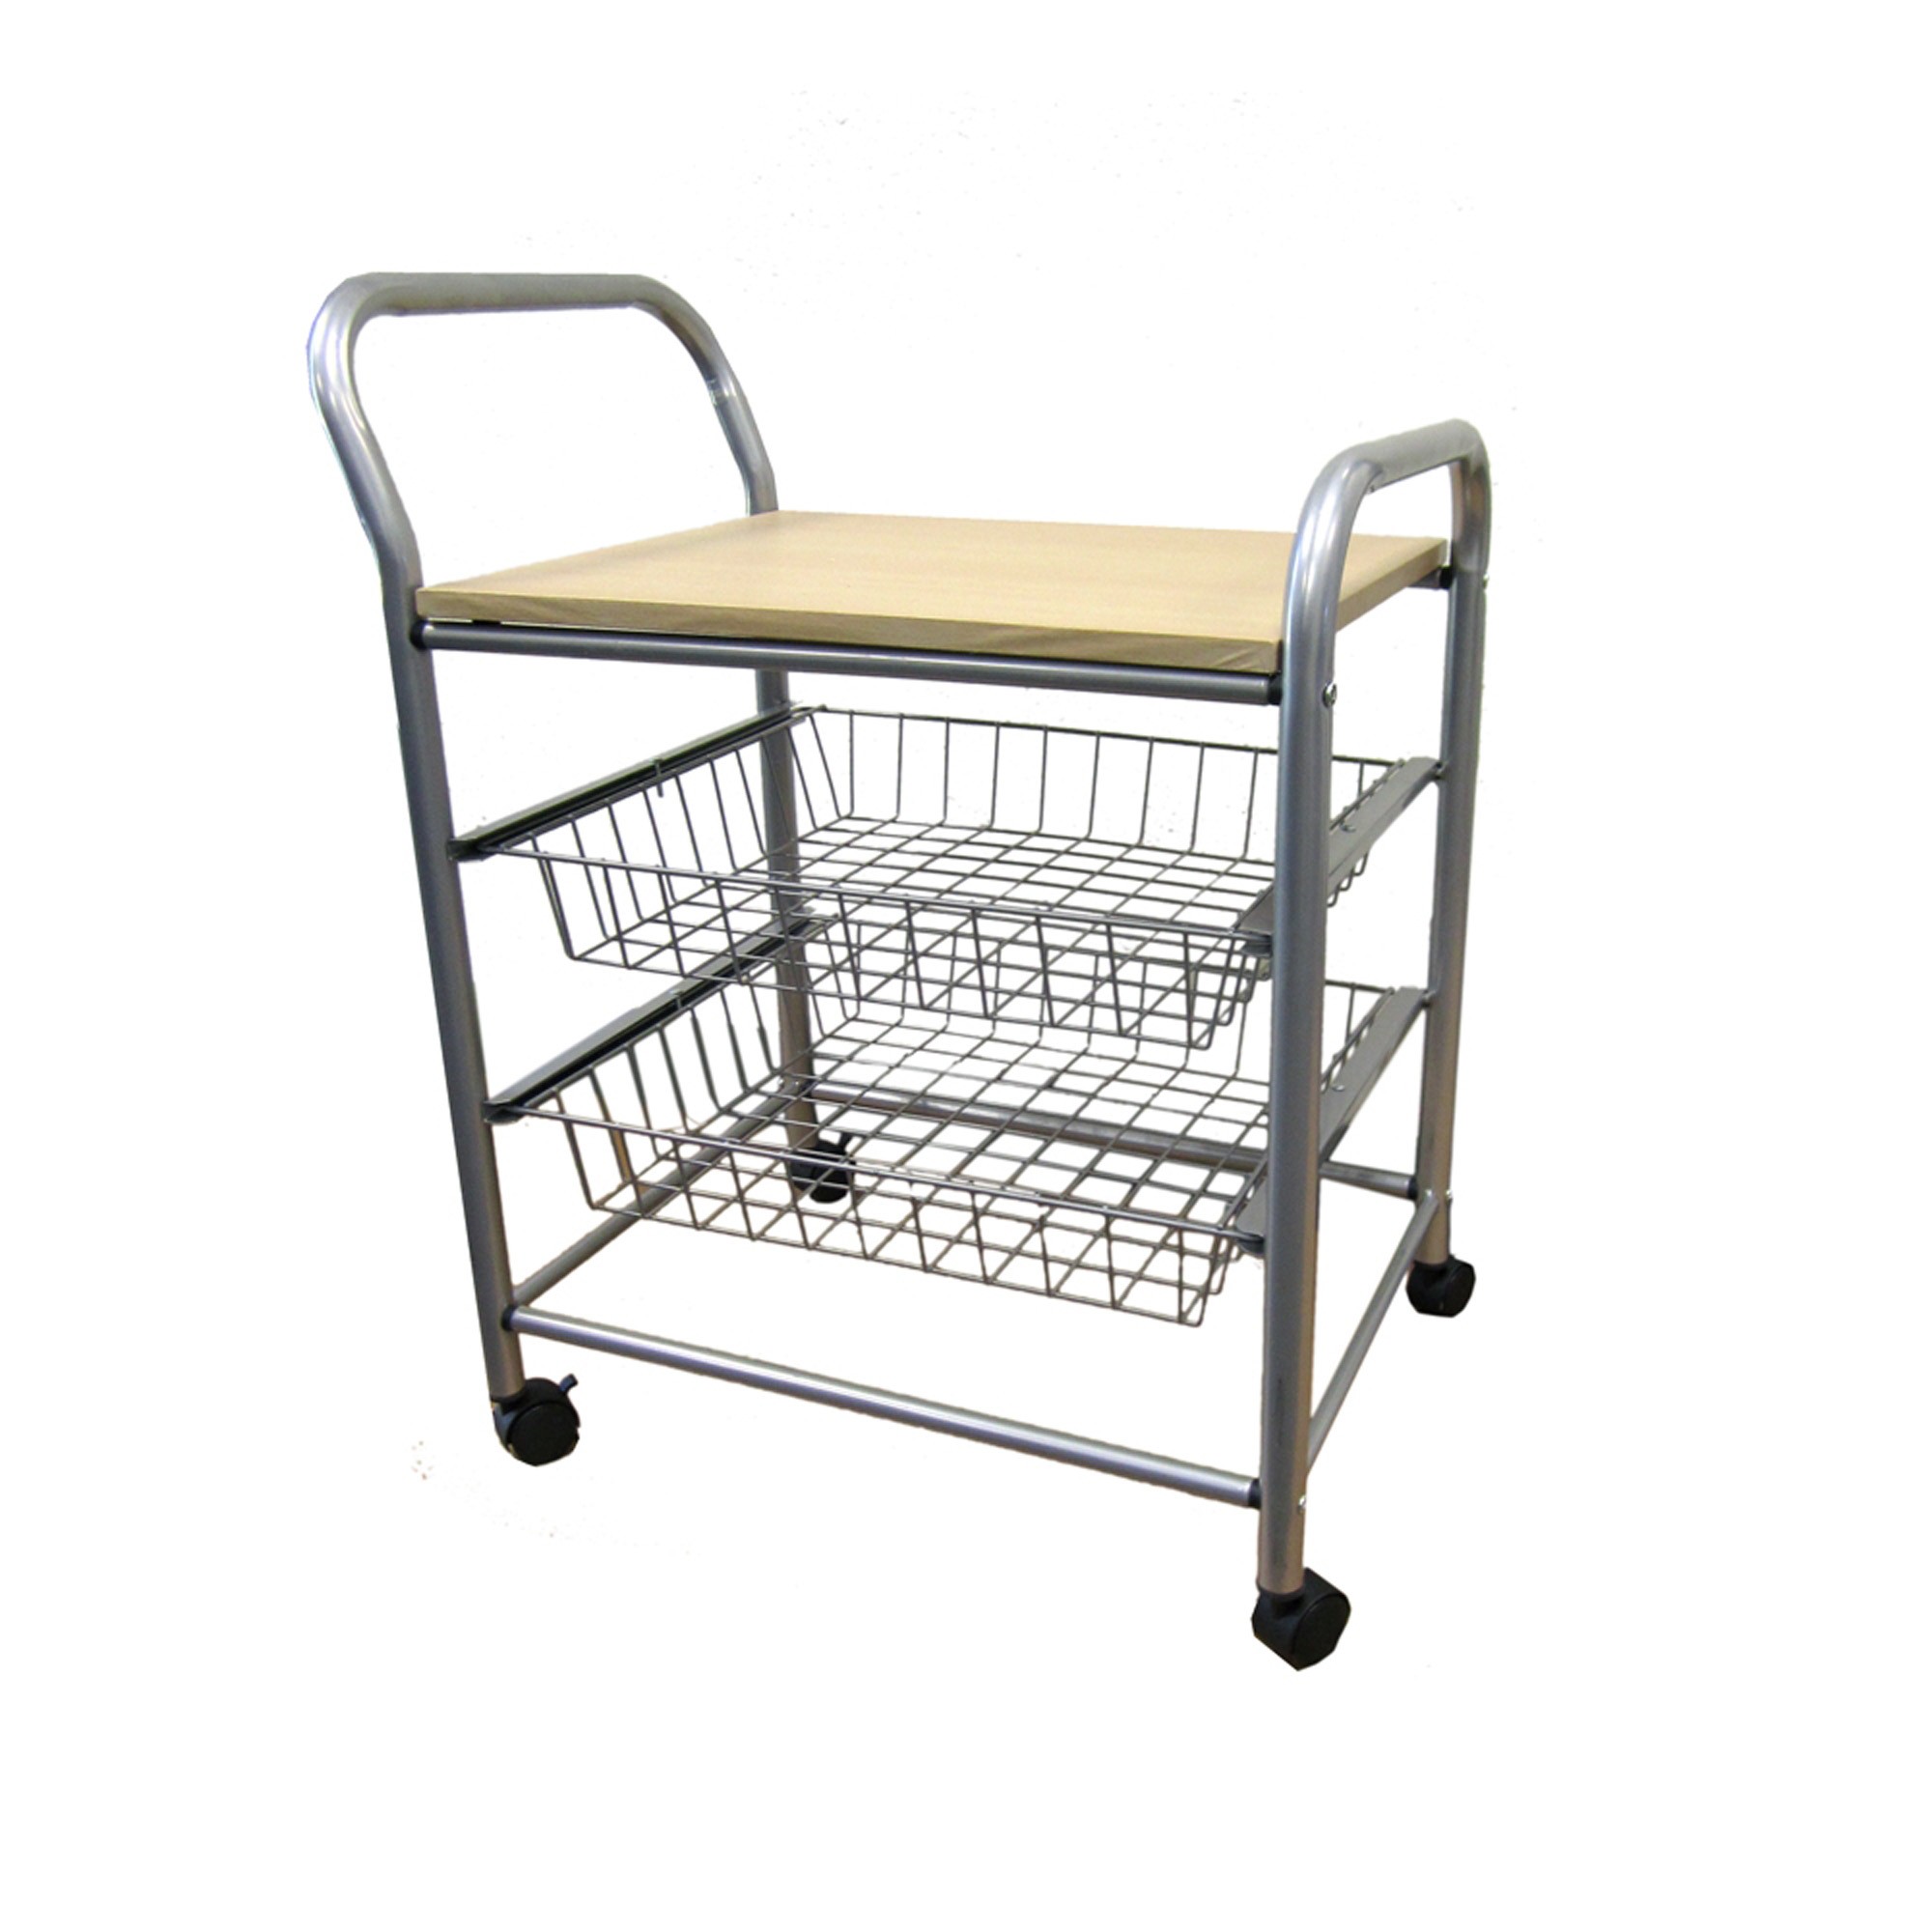 Steel and Natural Wood Multifunctional Utility Cart